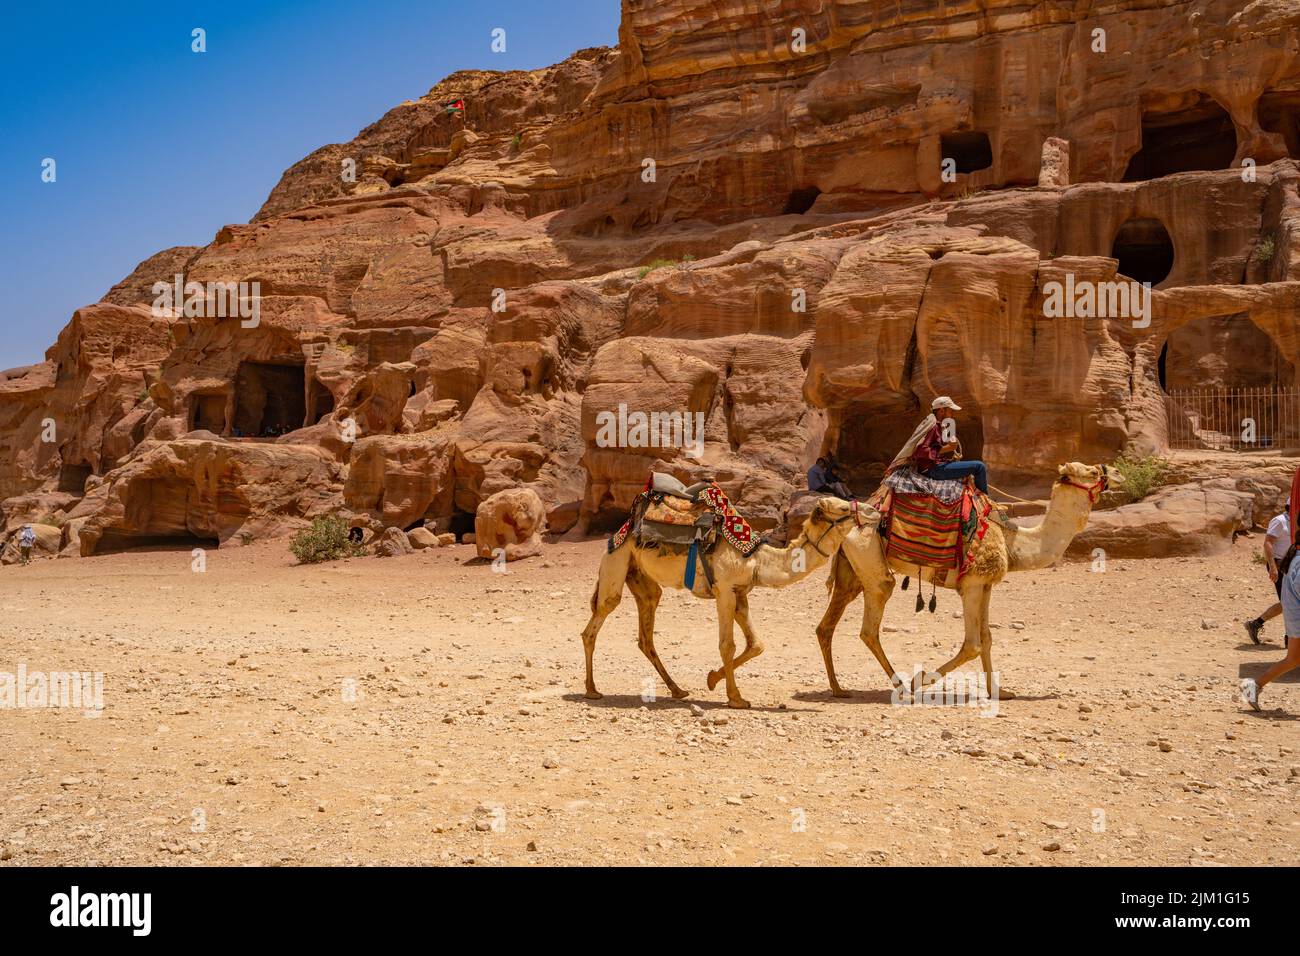 Camels in The Street of Fascades in Petra Jordan Stock Photo